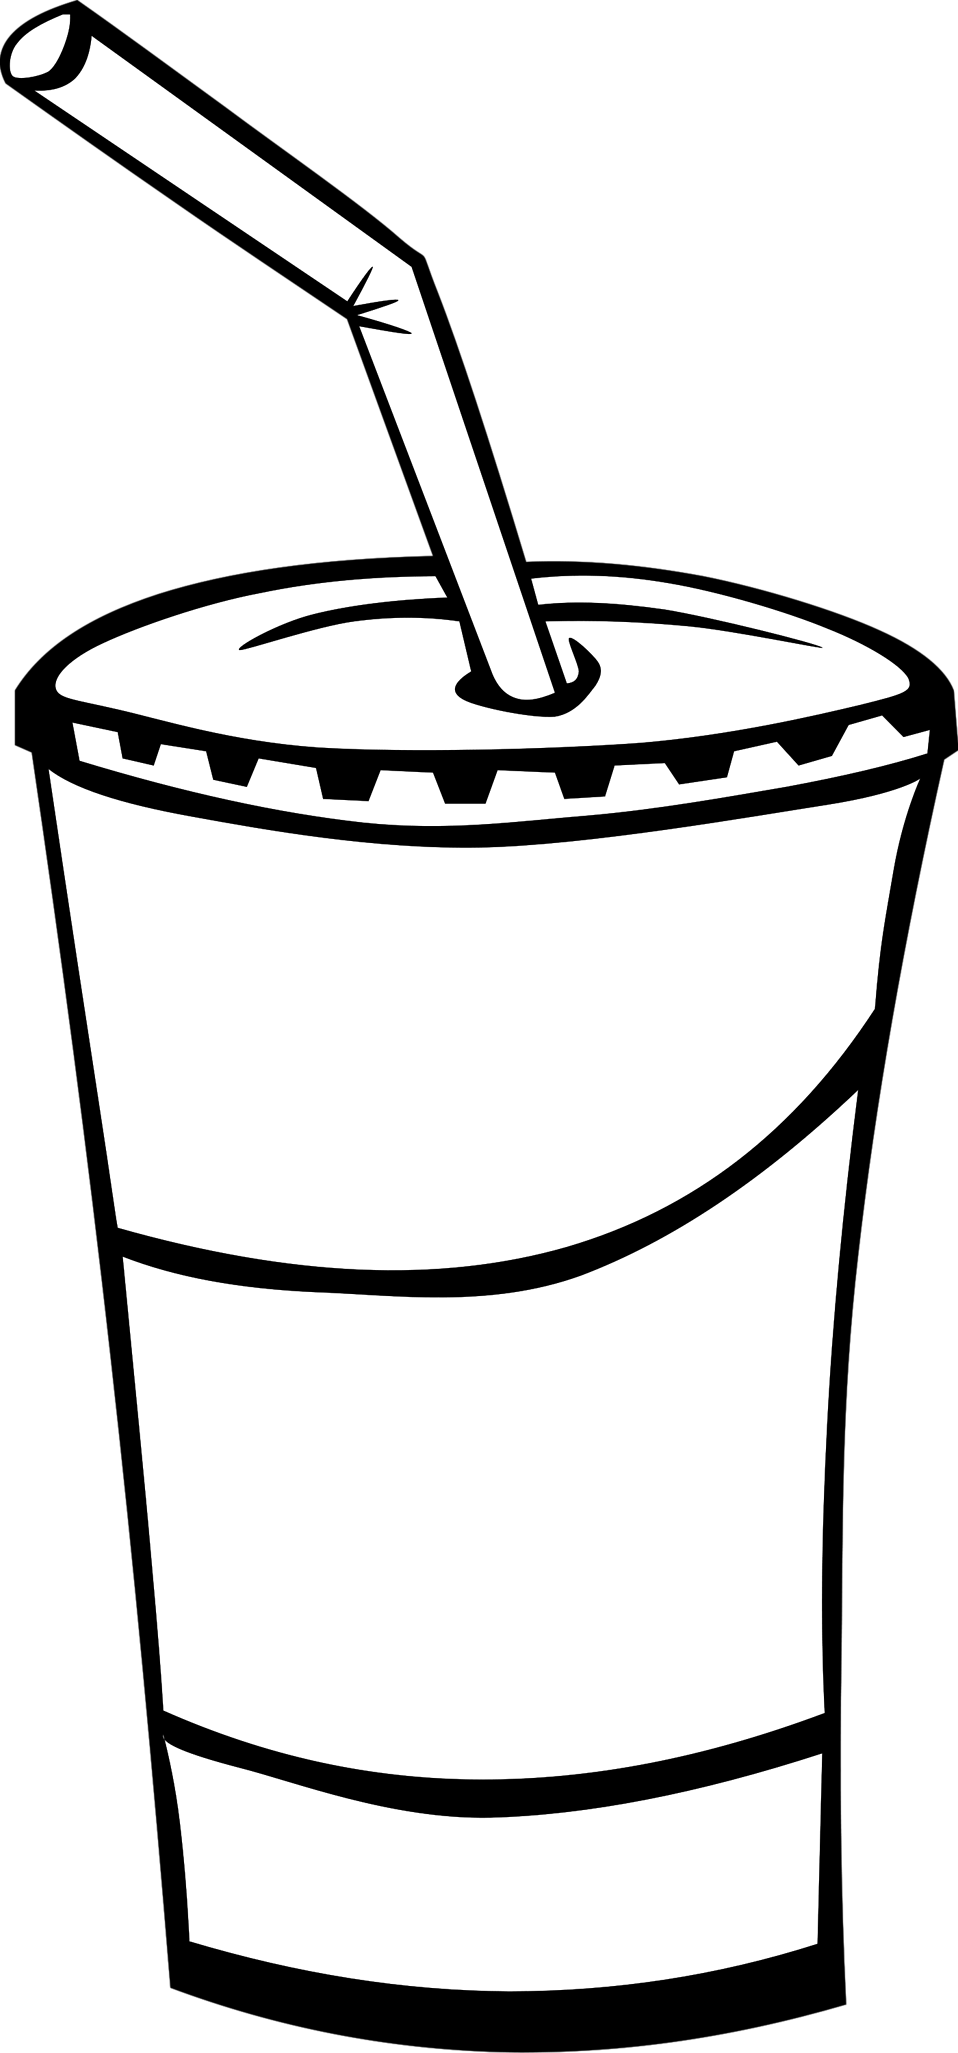 Clipart cup straw.